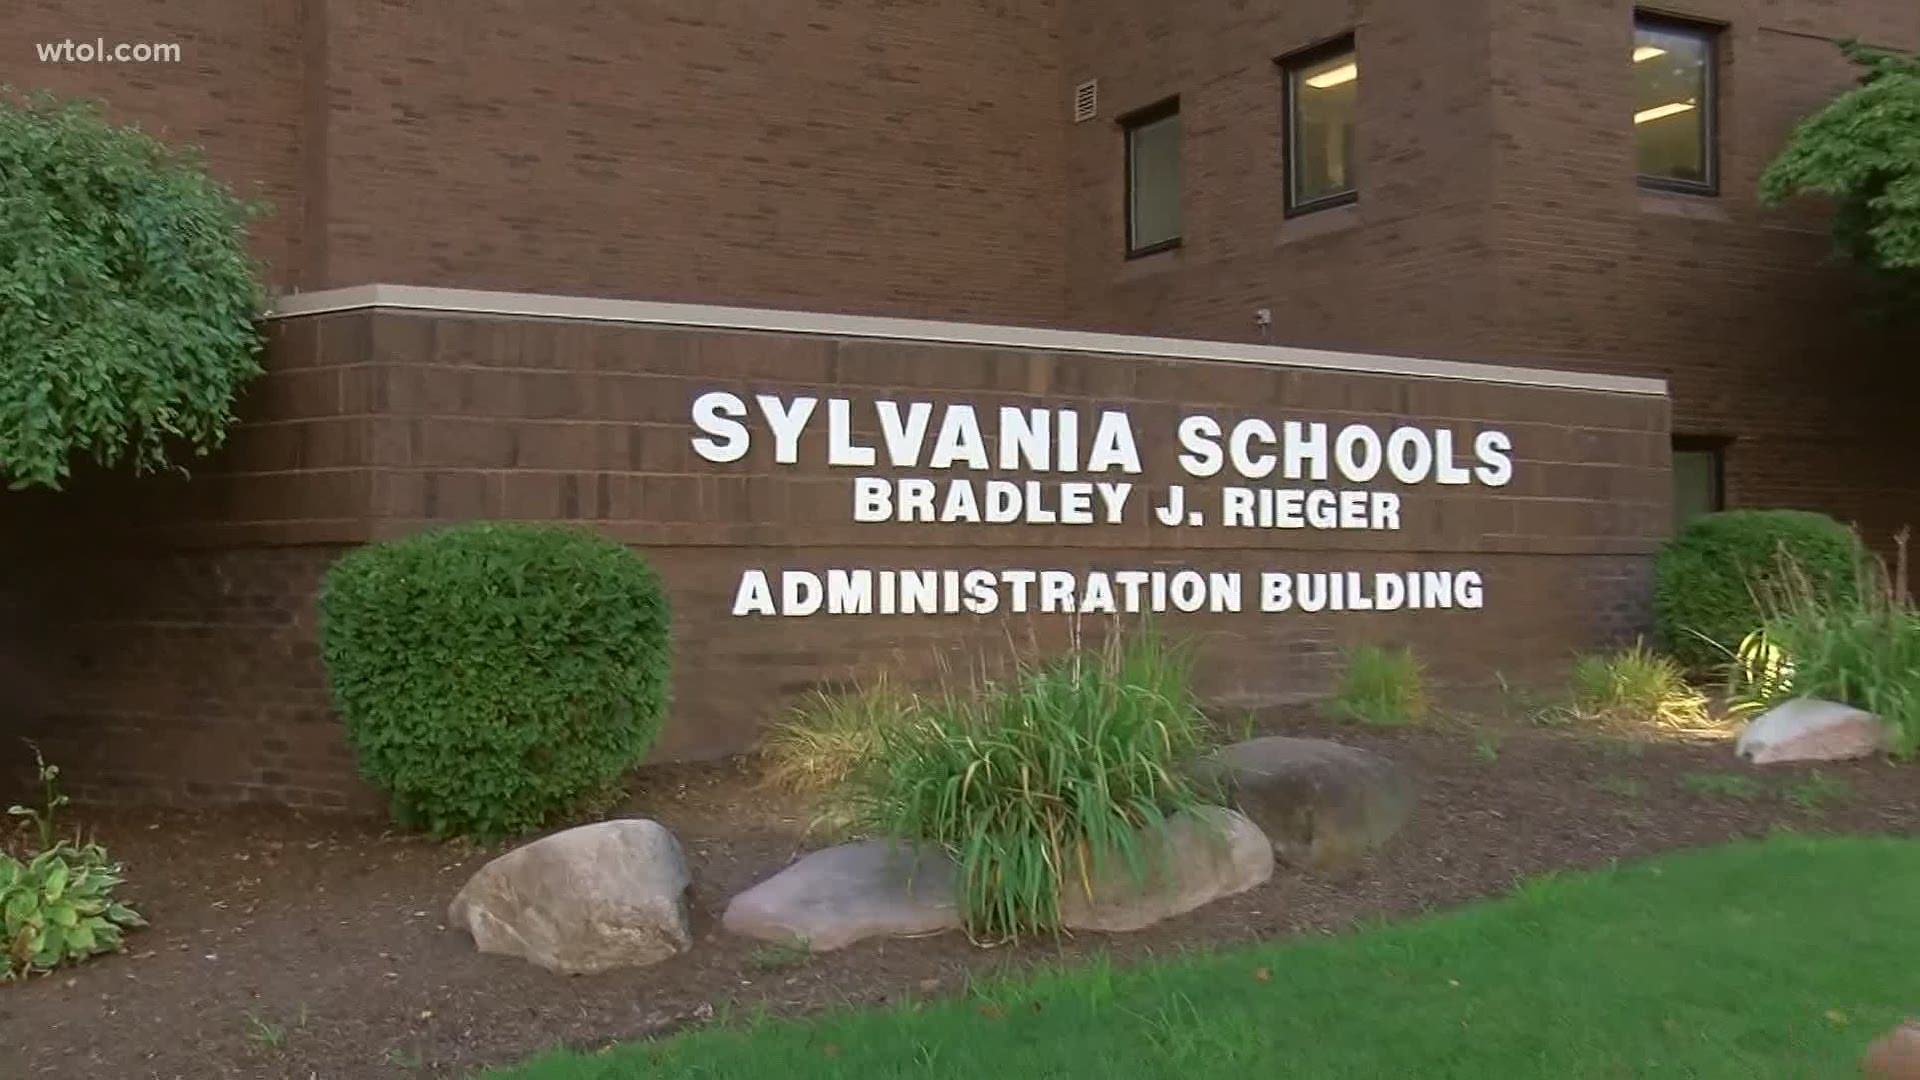 Citing the rise in COVID-19 cases in Lucas County, Sylvania City Schools officials announced that all students would remain on hybrid learning until at least Nov. 9.